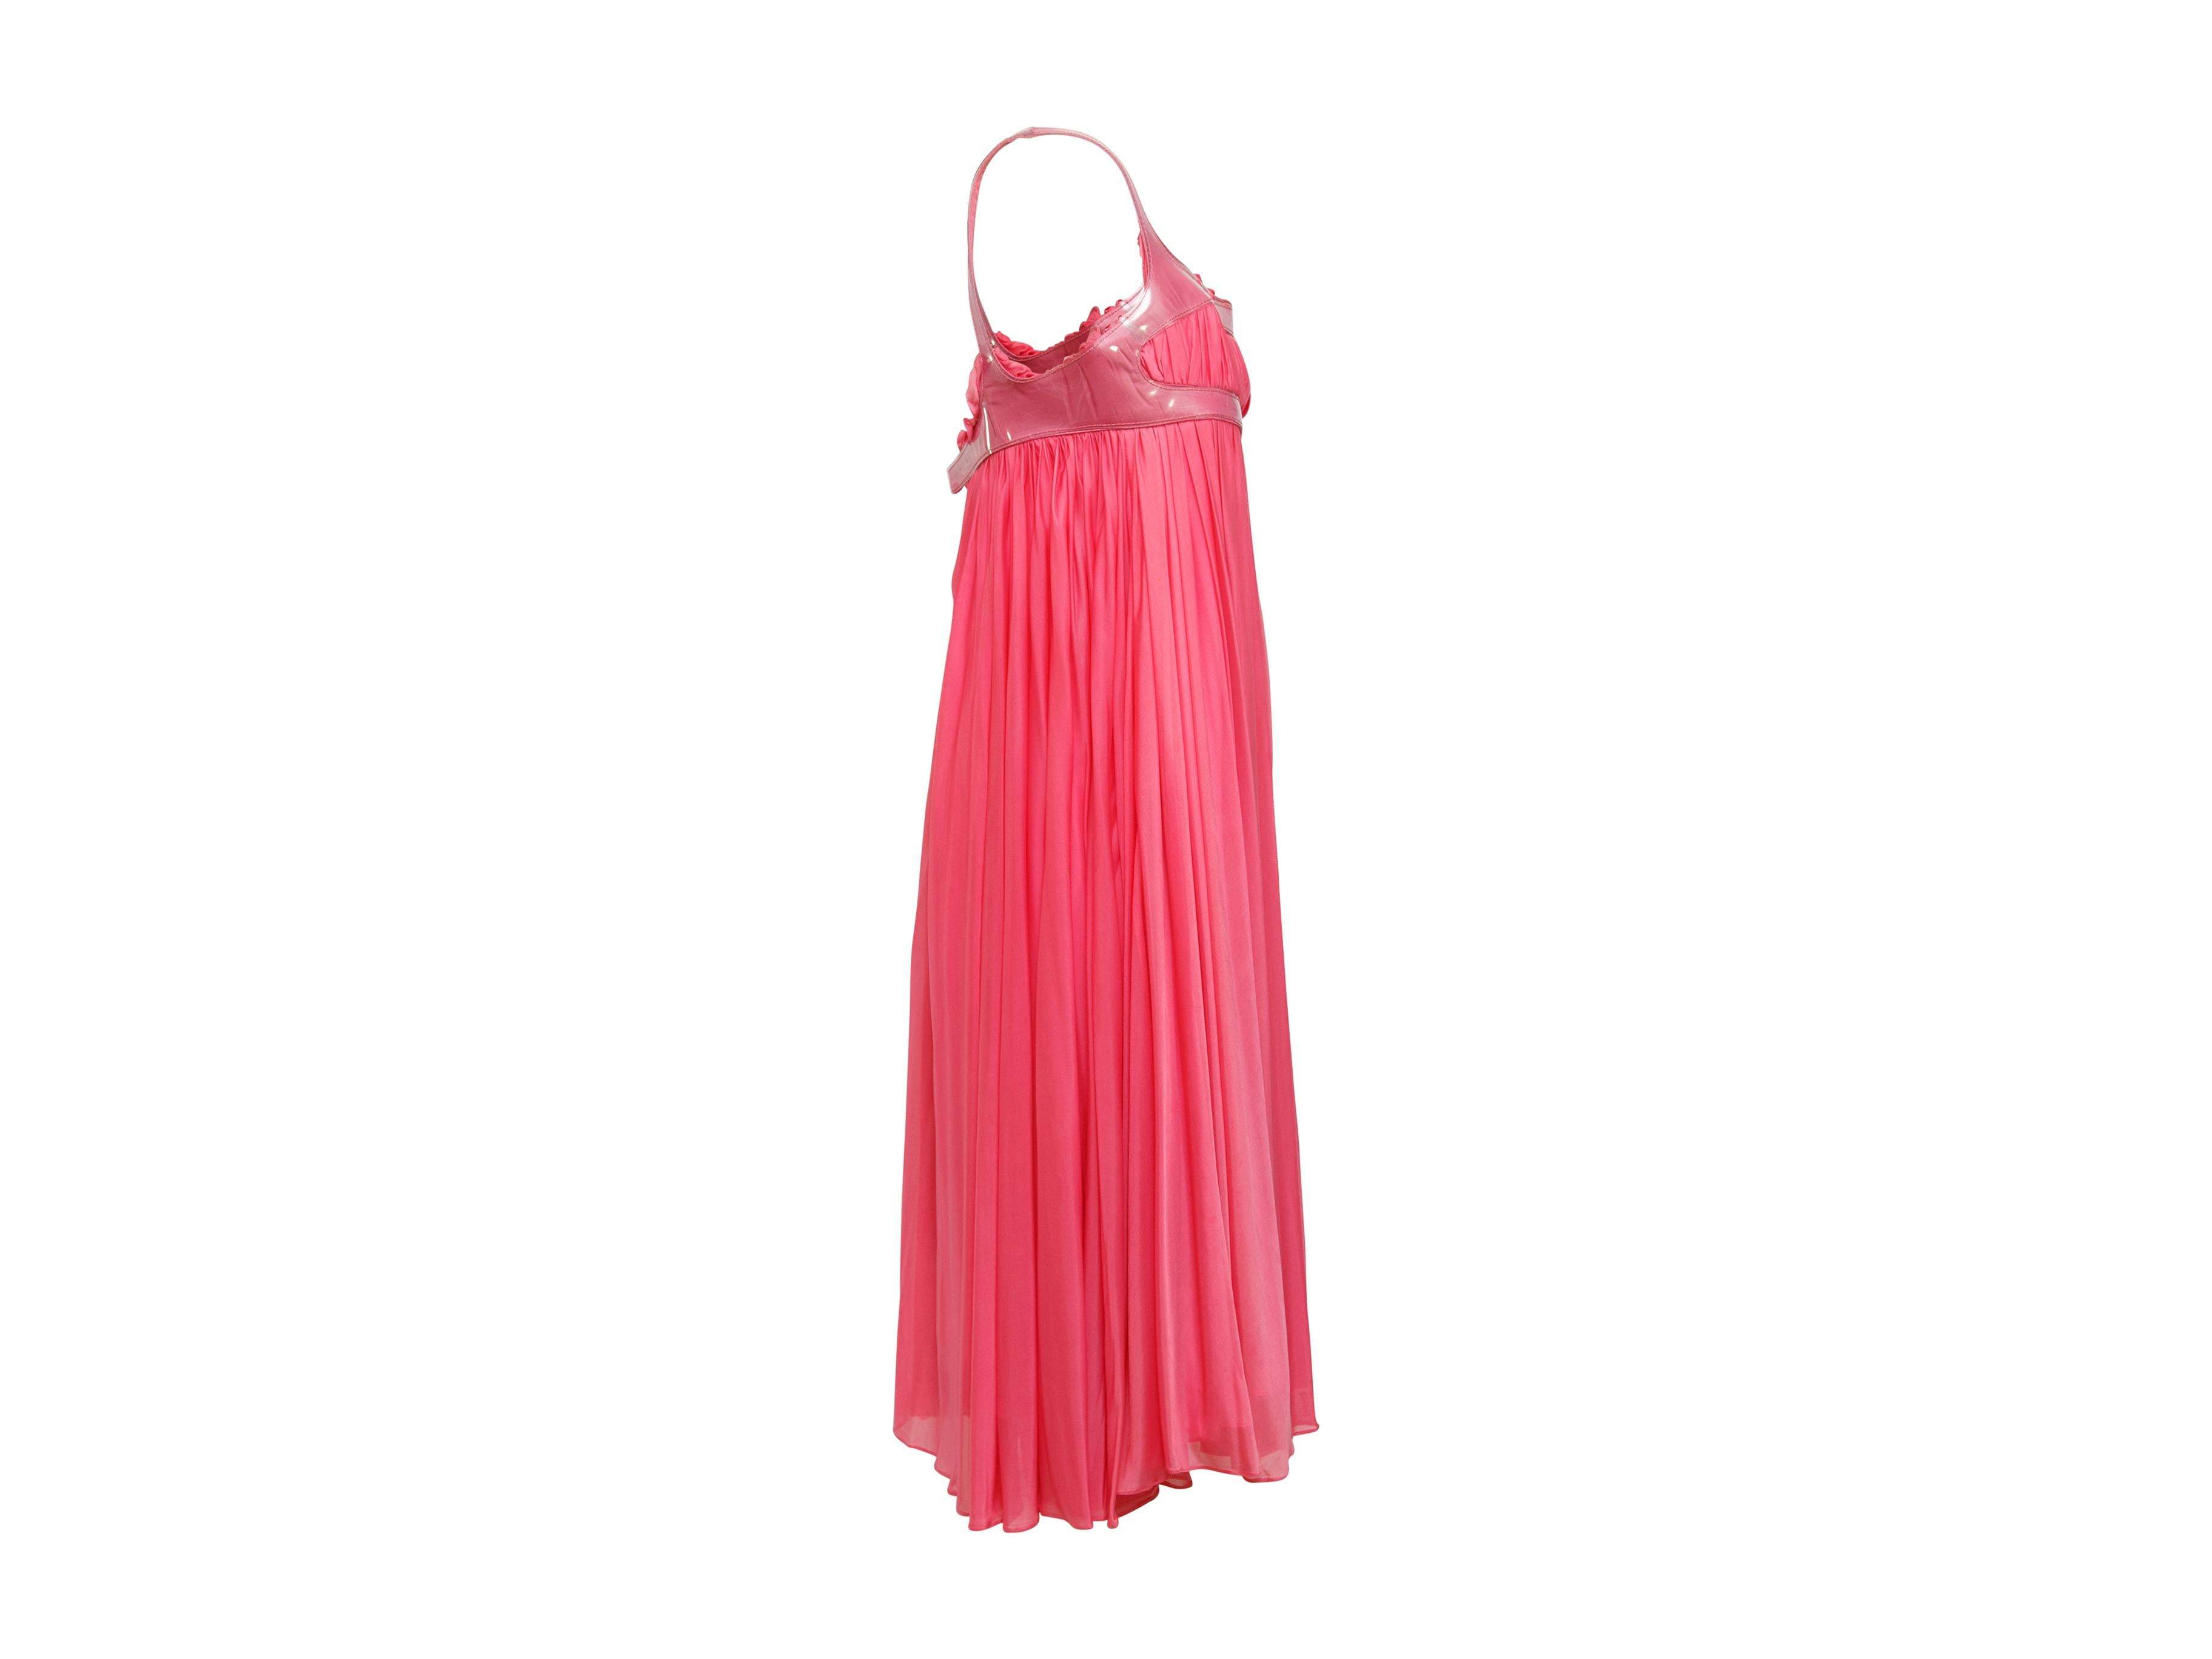 Product details:  Hot pink pleated babydoll dress by Alexander McQueen.  Trimmed with vinyl.  Sleeveless.  Empire waist.  Concealed hook back closure.  Label IT 40.  29